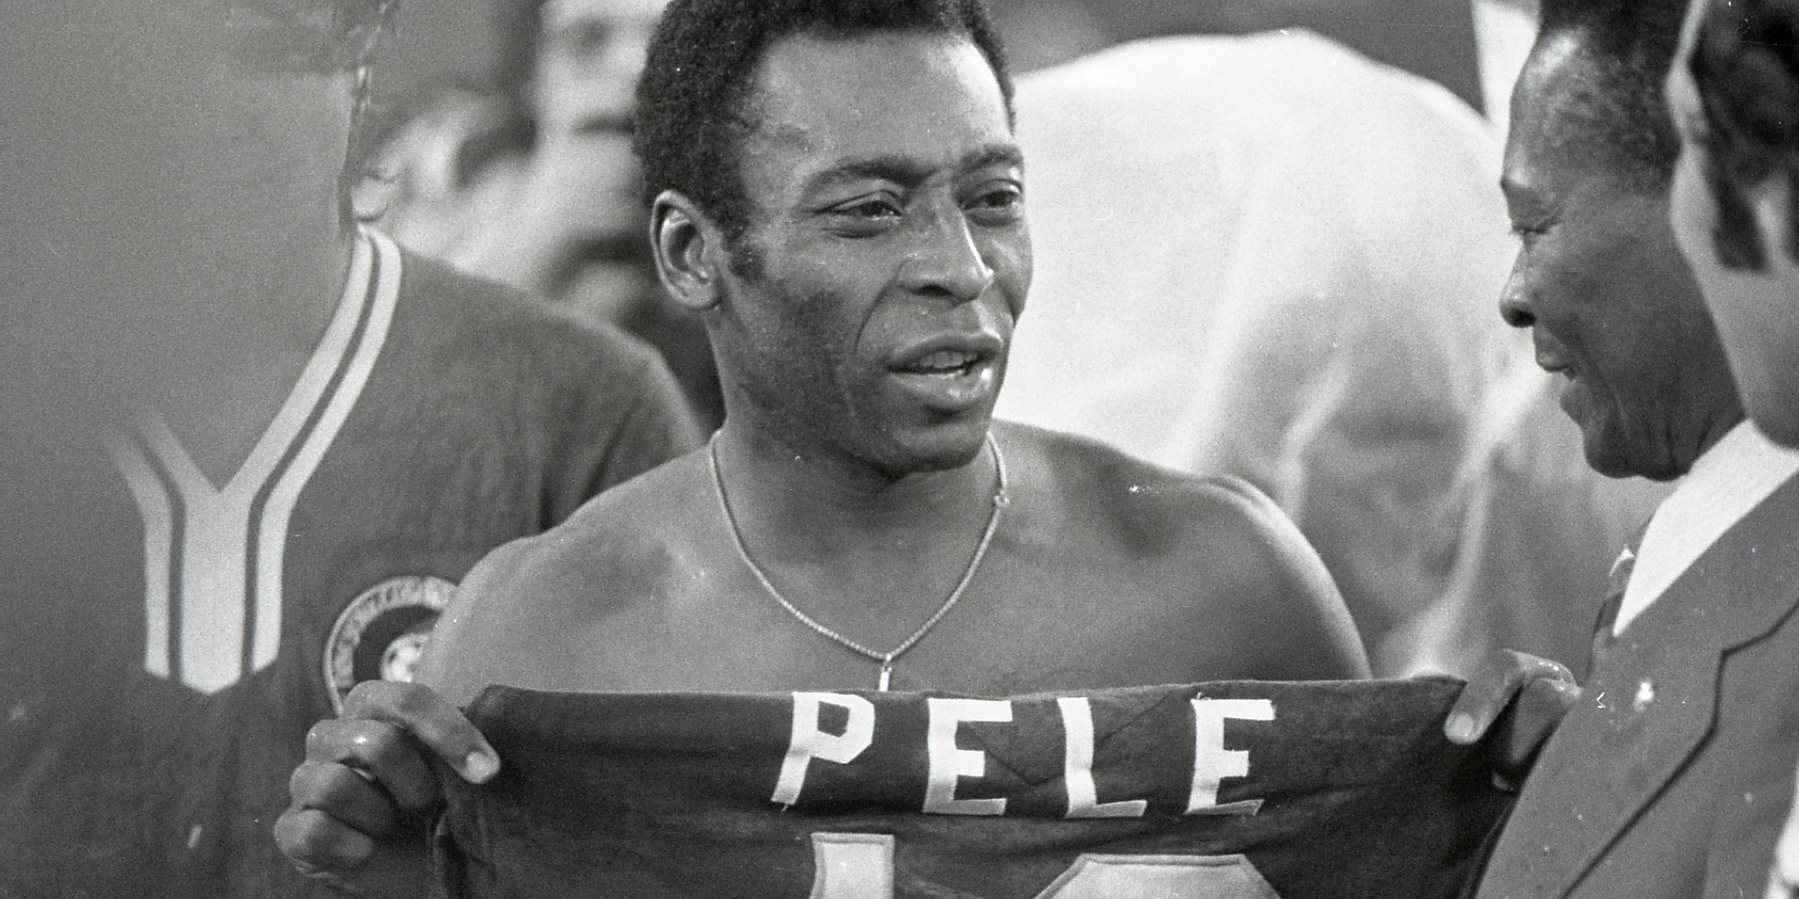 Soccer player Pele hands jersey to his father at his last professional game in 1977